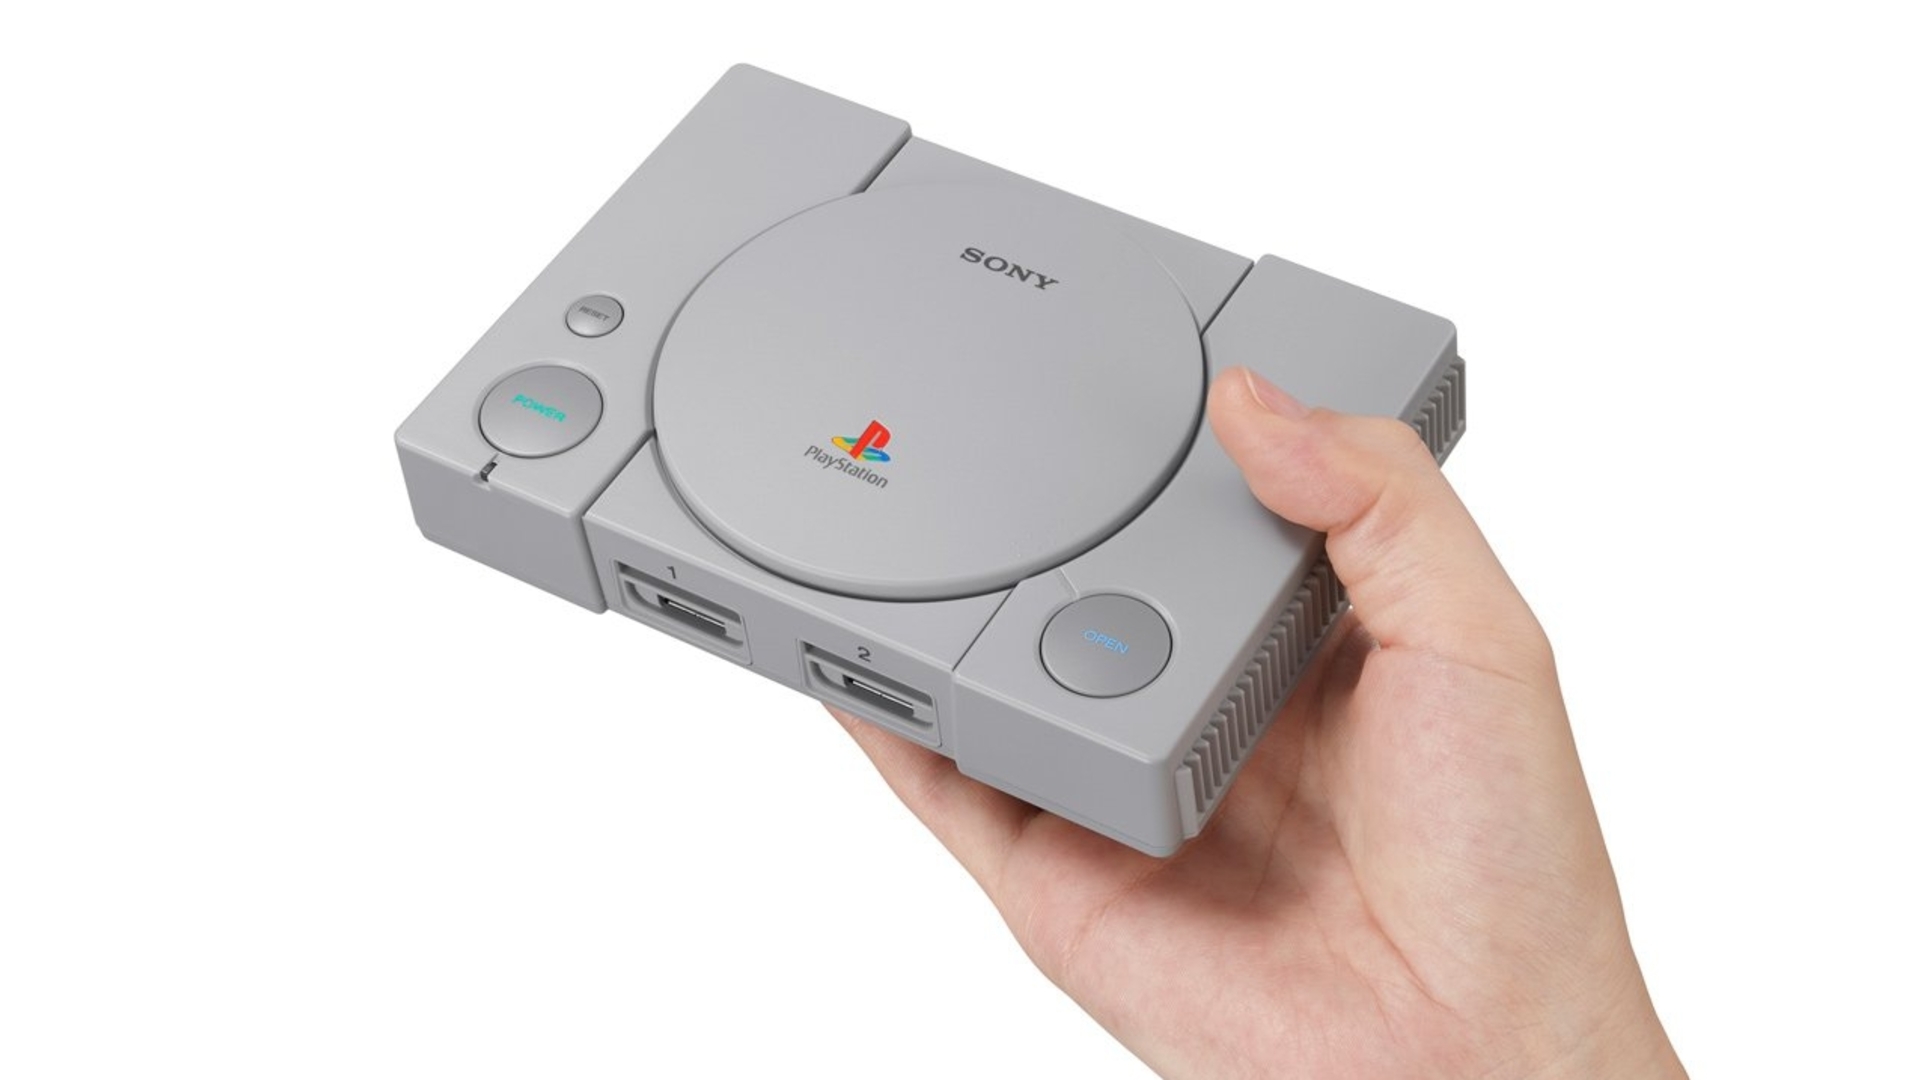 A product shot of a playstation